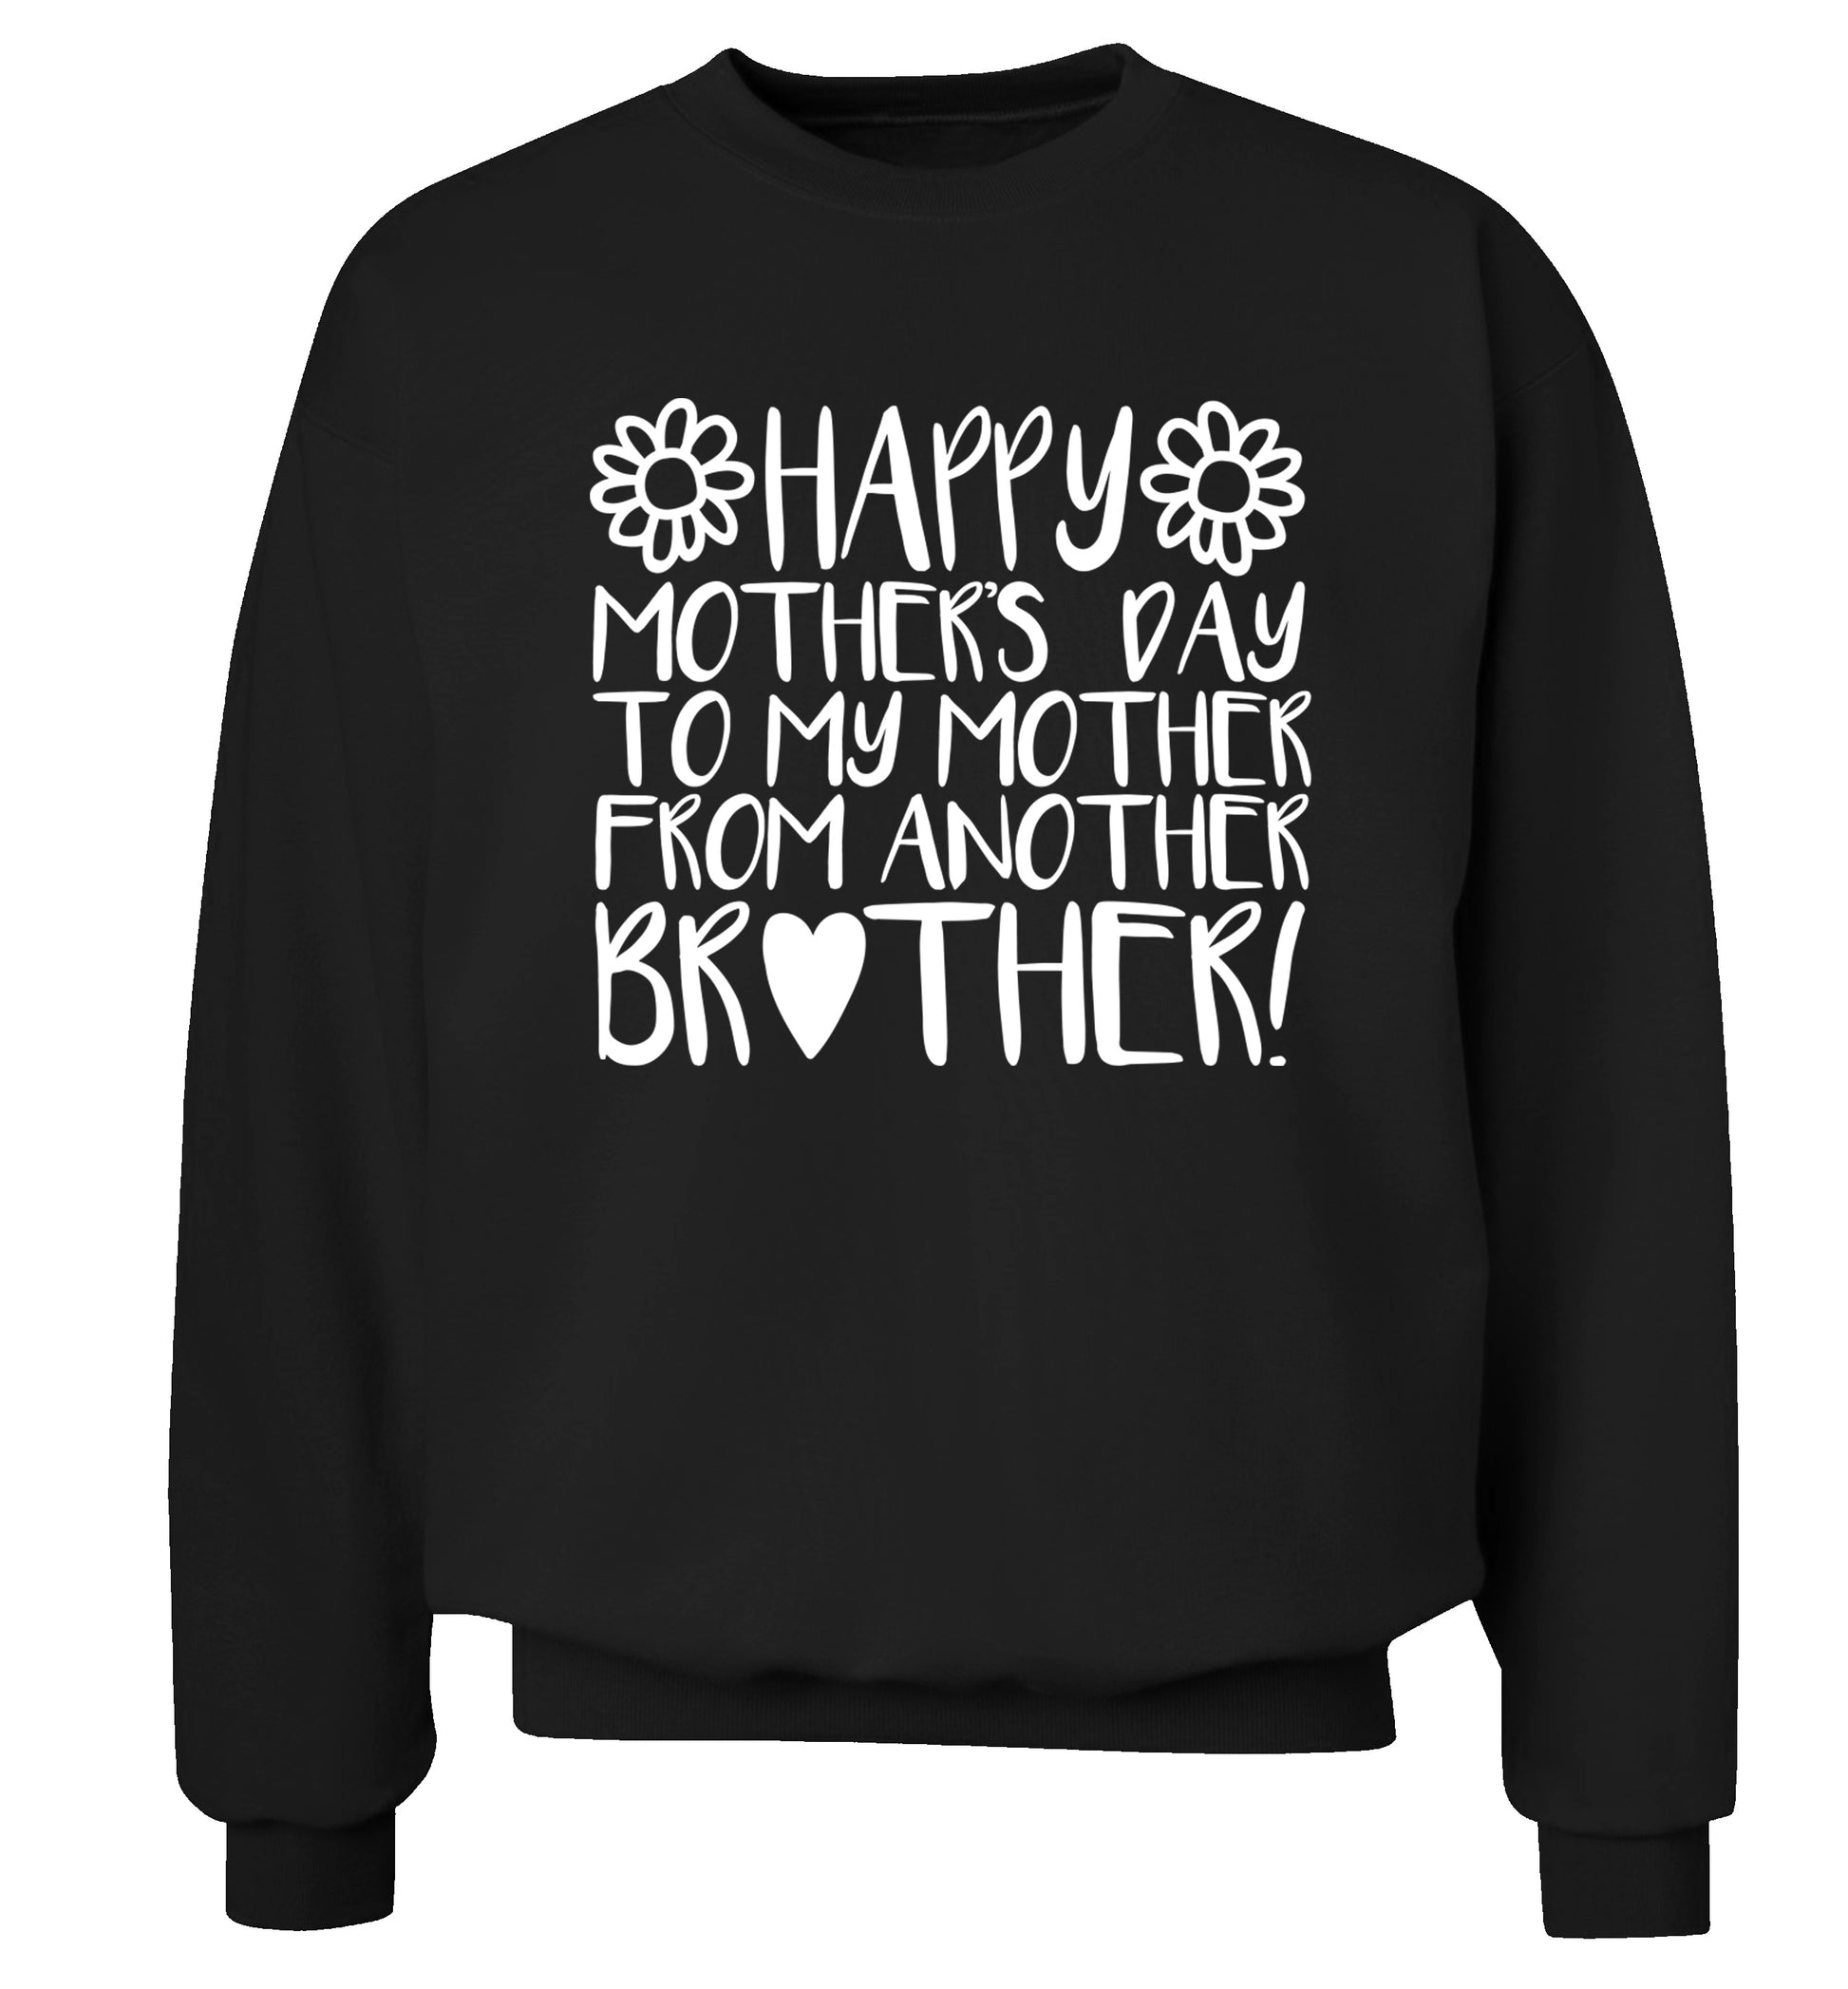 Happy mother's day to my mother from another brother Adult's unisex black Sweater 2XL